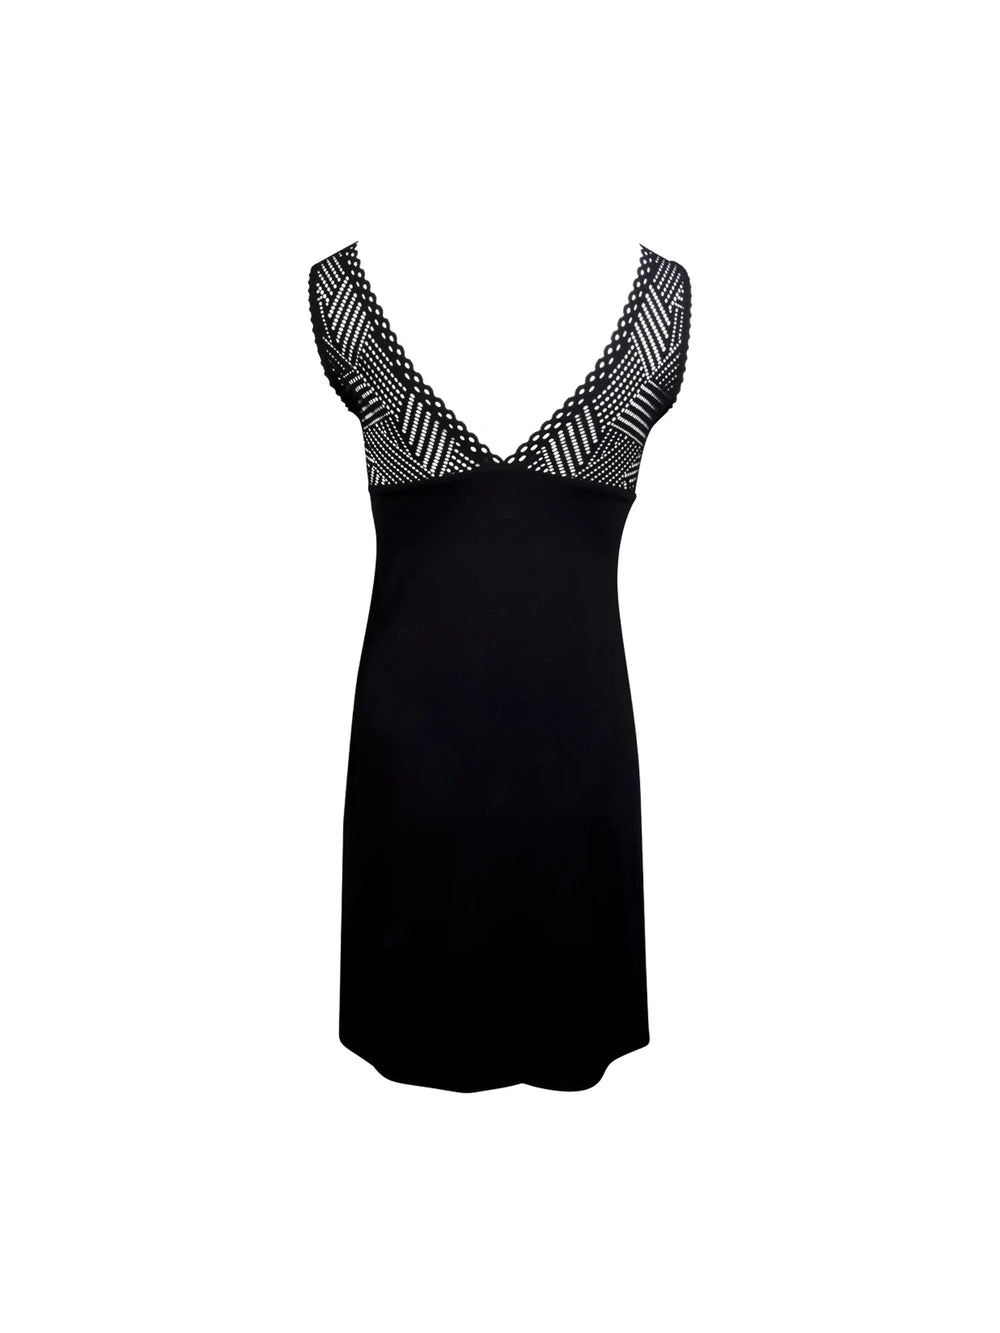 Antigel By Lise Charmel Tressage Graphic Nightie - Tressage Noir Nighty Antigel by Lise Charmel